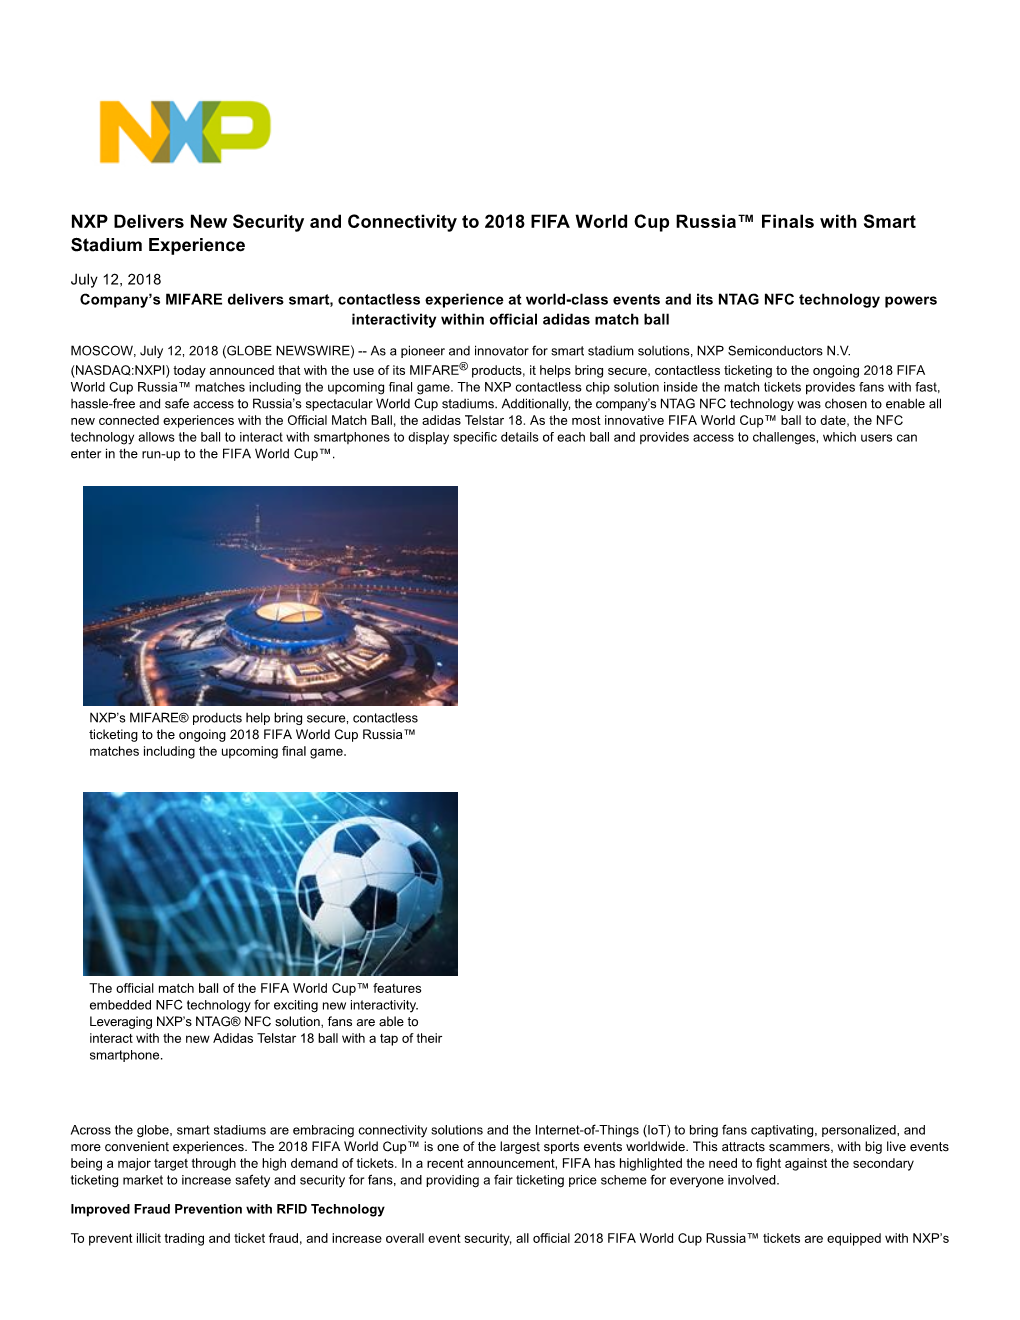 NXP Delivers New Security and Connectivity to 2018 FIFA World Cup Russia™ Finals with Smart Stadium Experience